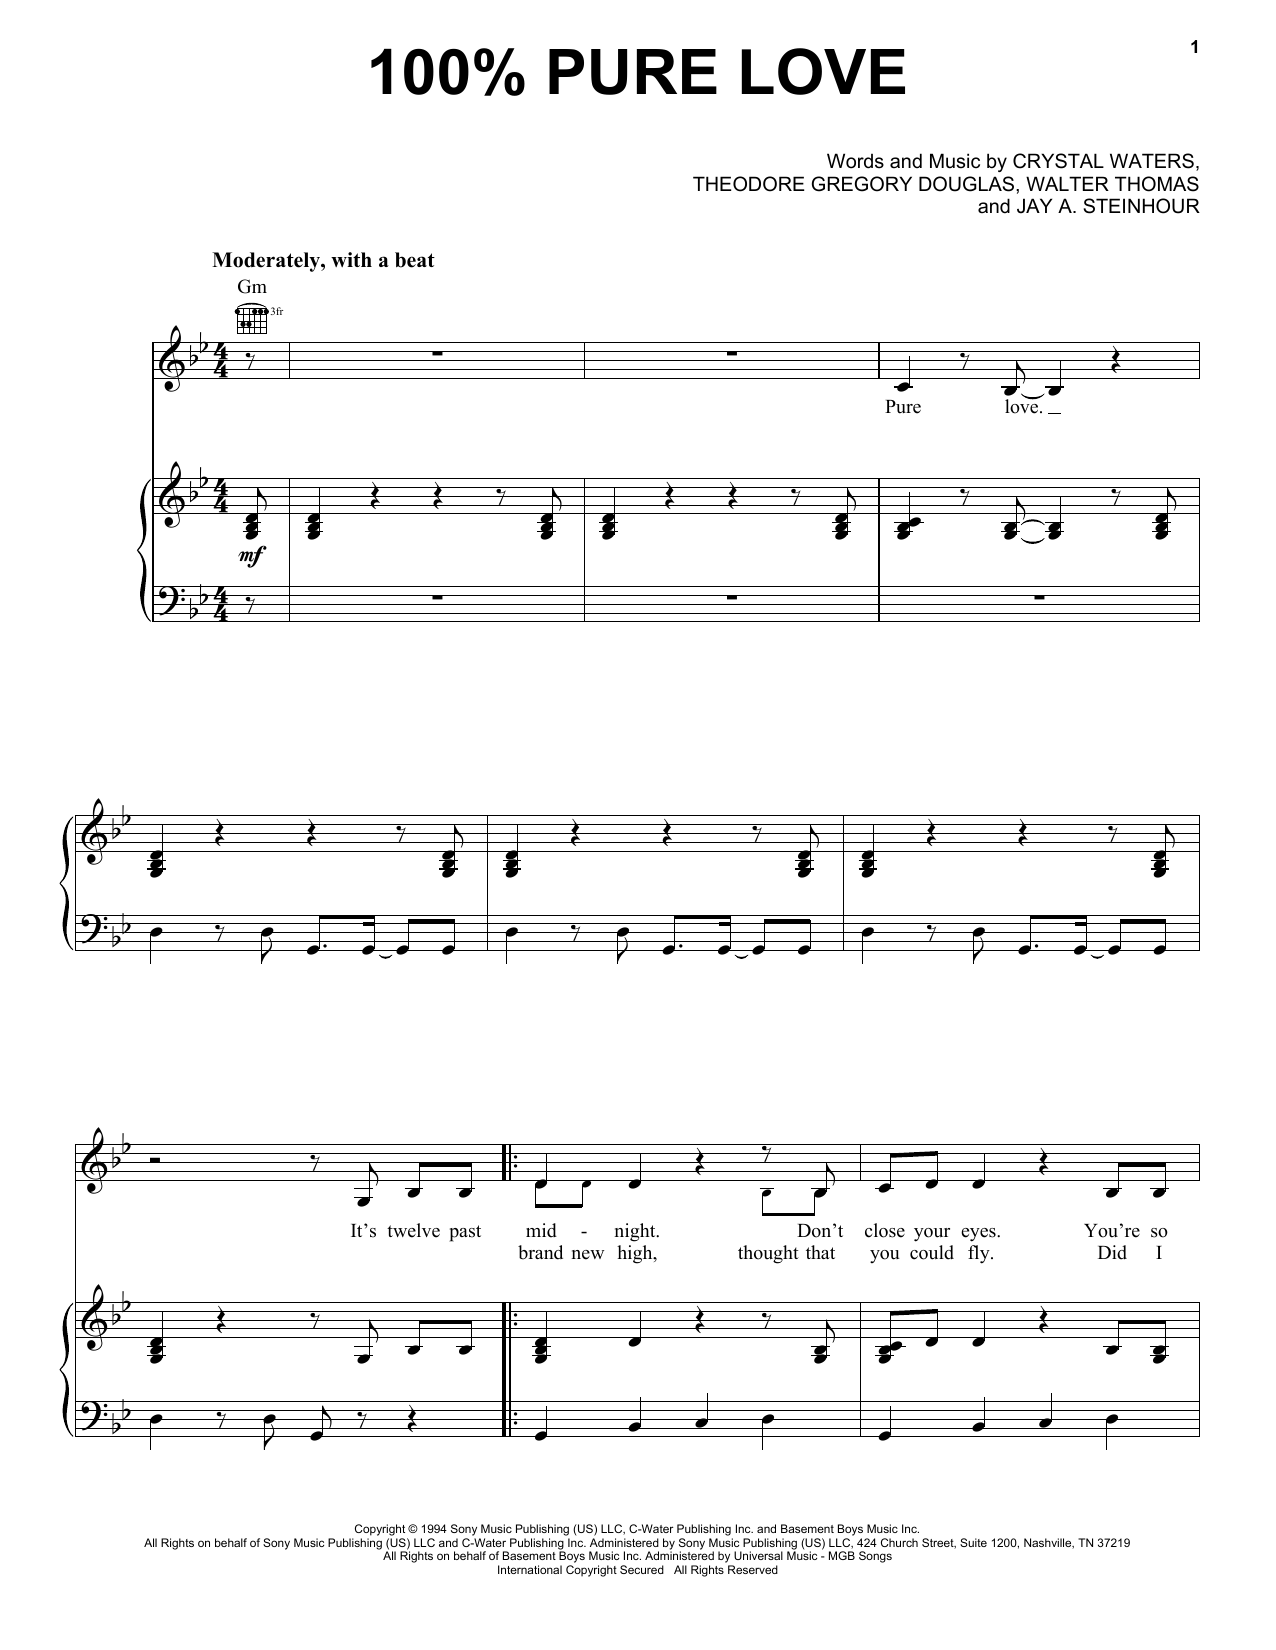 Download Crystal Waters 100% Pure Love Sheet Music